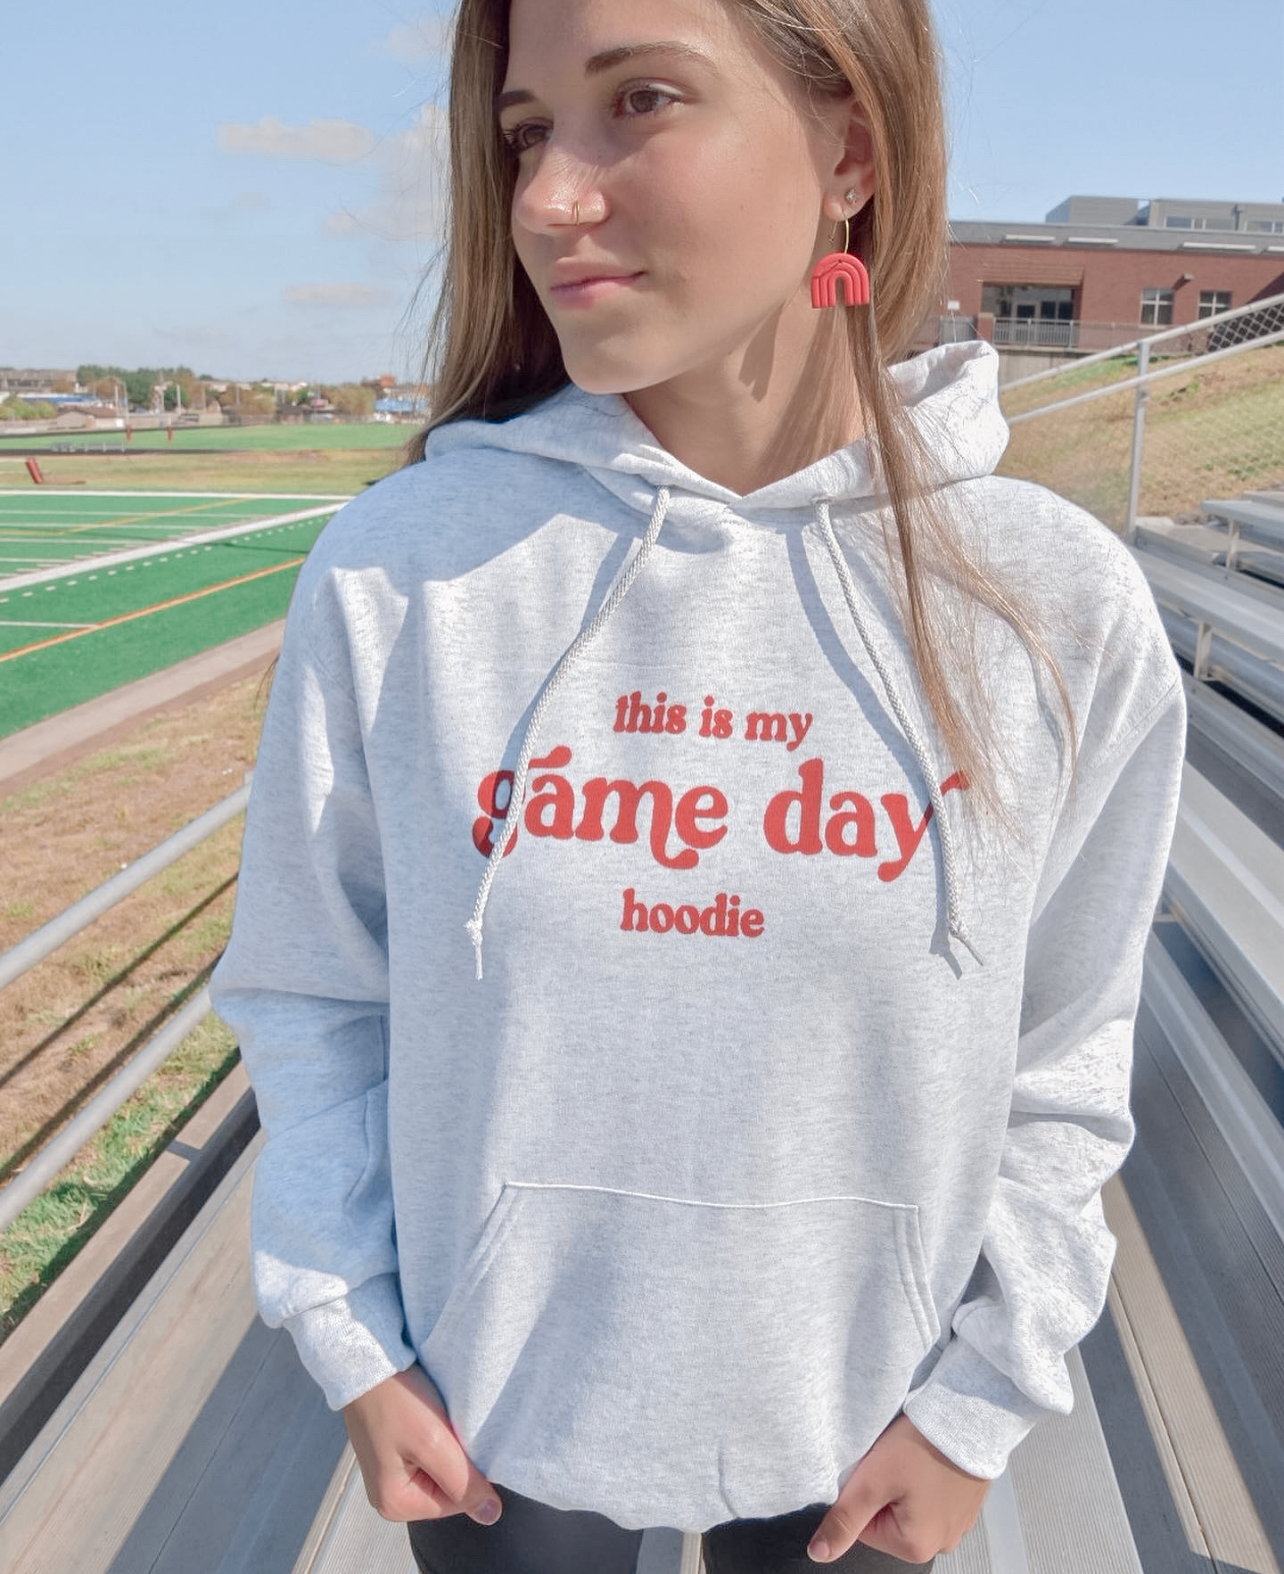 This is my game day hoodie